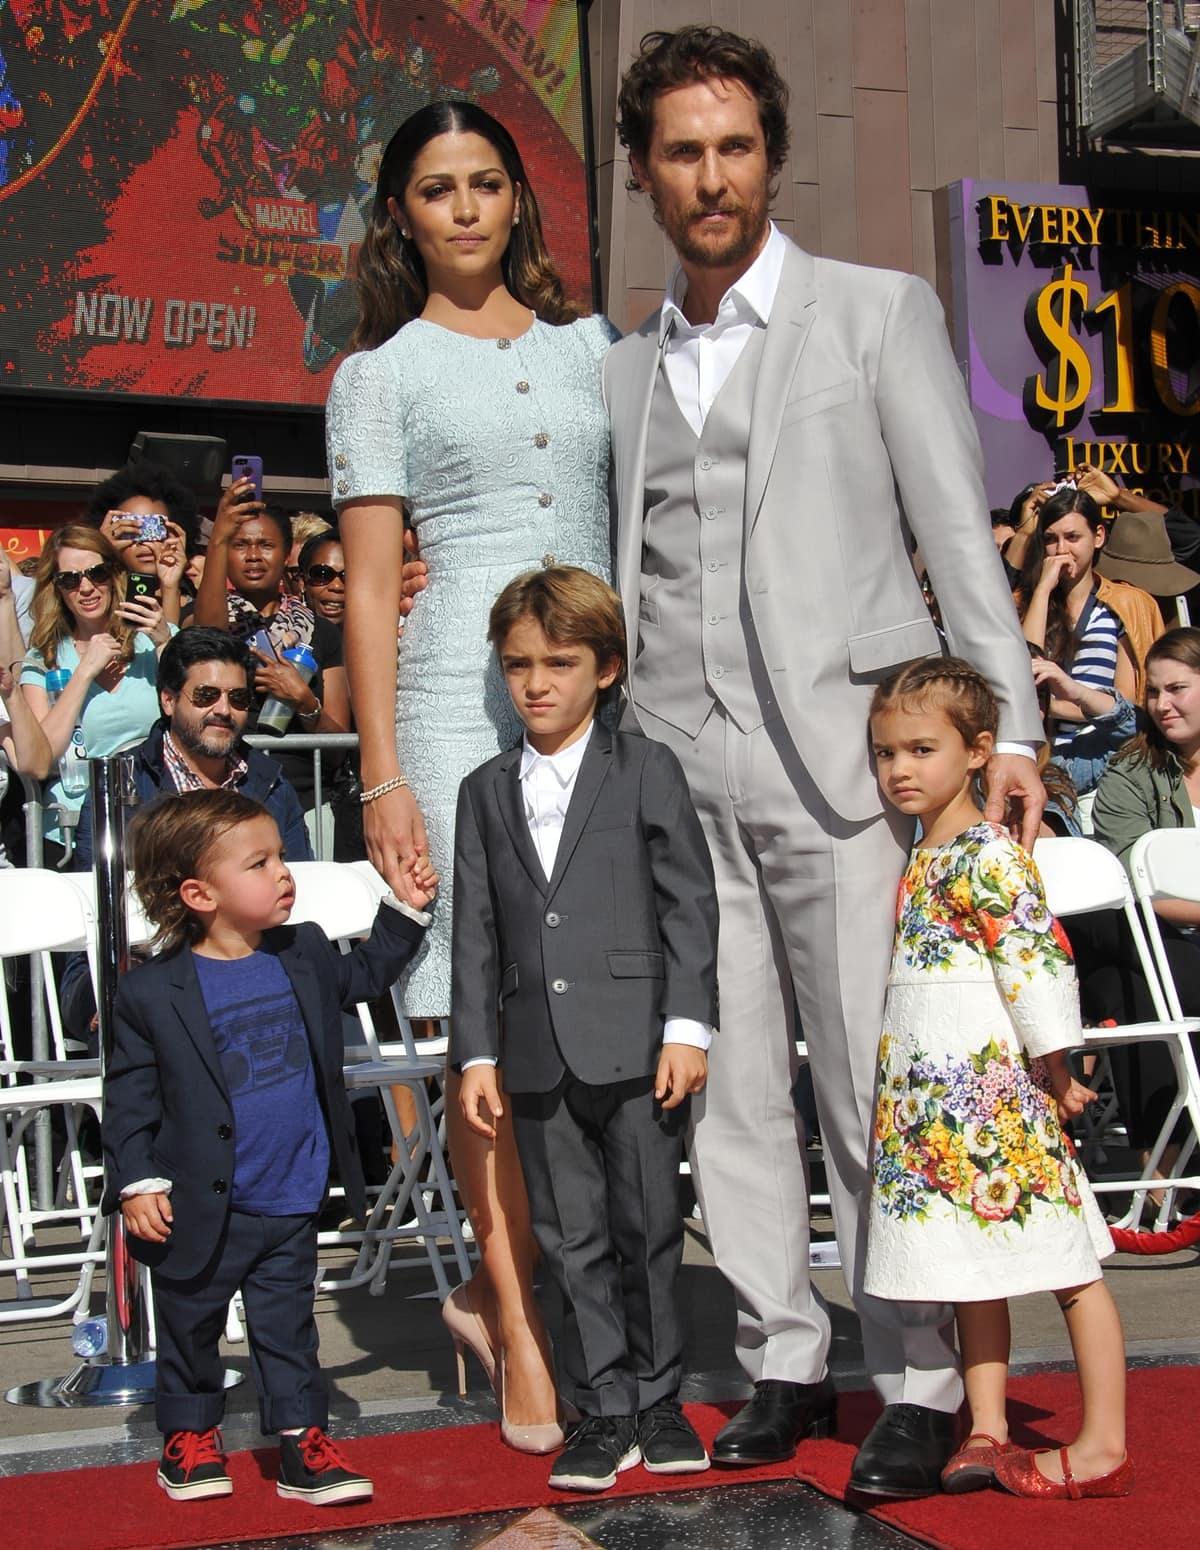 Matthew McConaughey was joined by his wife Camila Alves, their daughter Vida, and their sons Levi and Livingston while receiving his star on the Hollywood Walk of Fame on November 17, 2014, in Hollywood